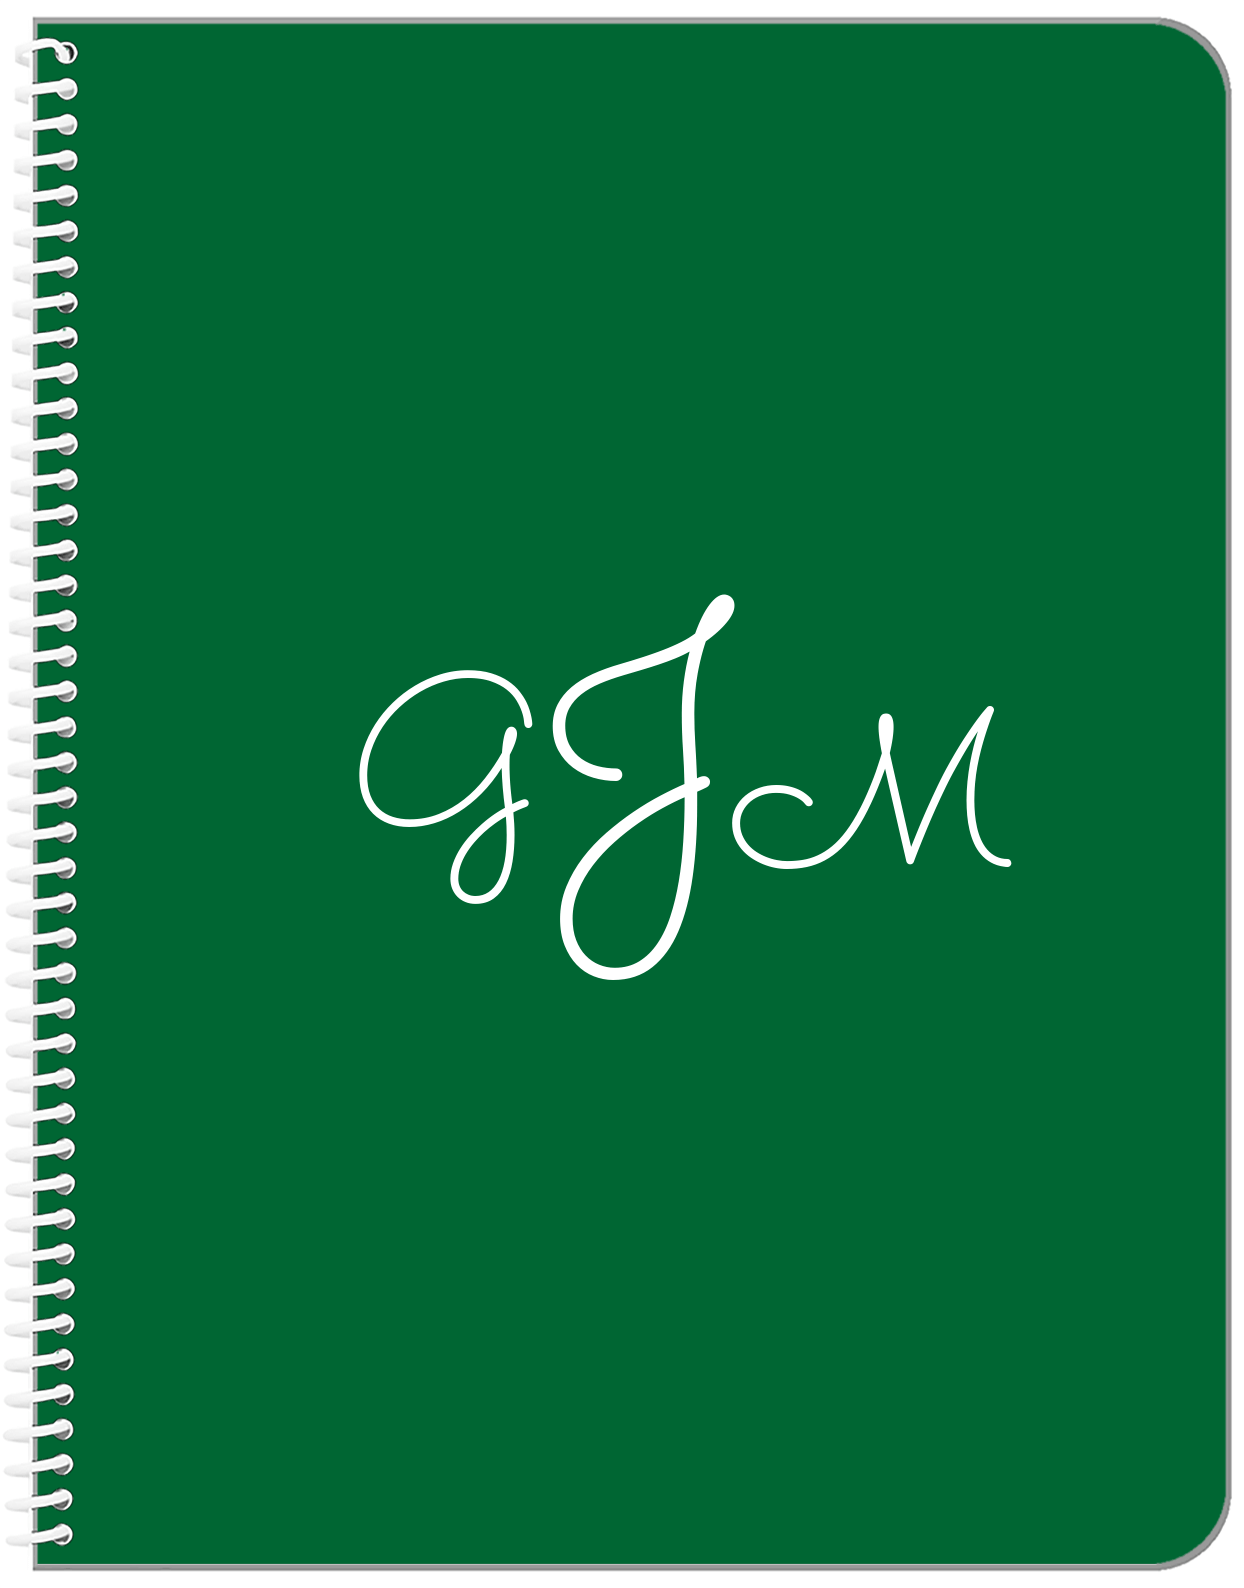 Personalized Solid Color Notebook  - Green Background - Mongoram - Front View